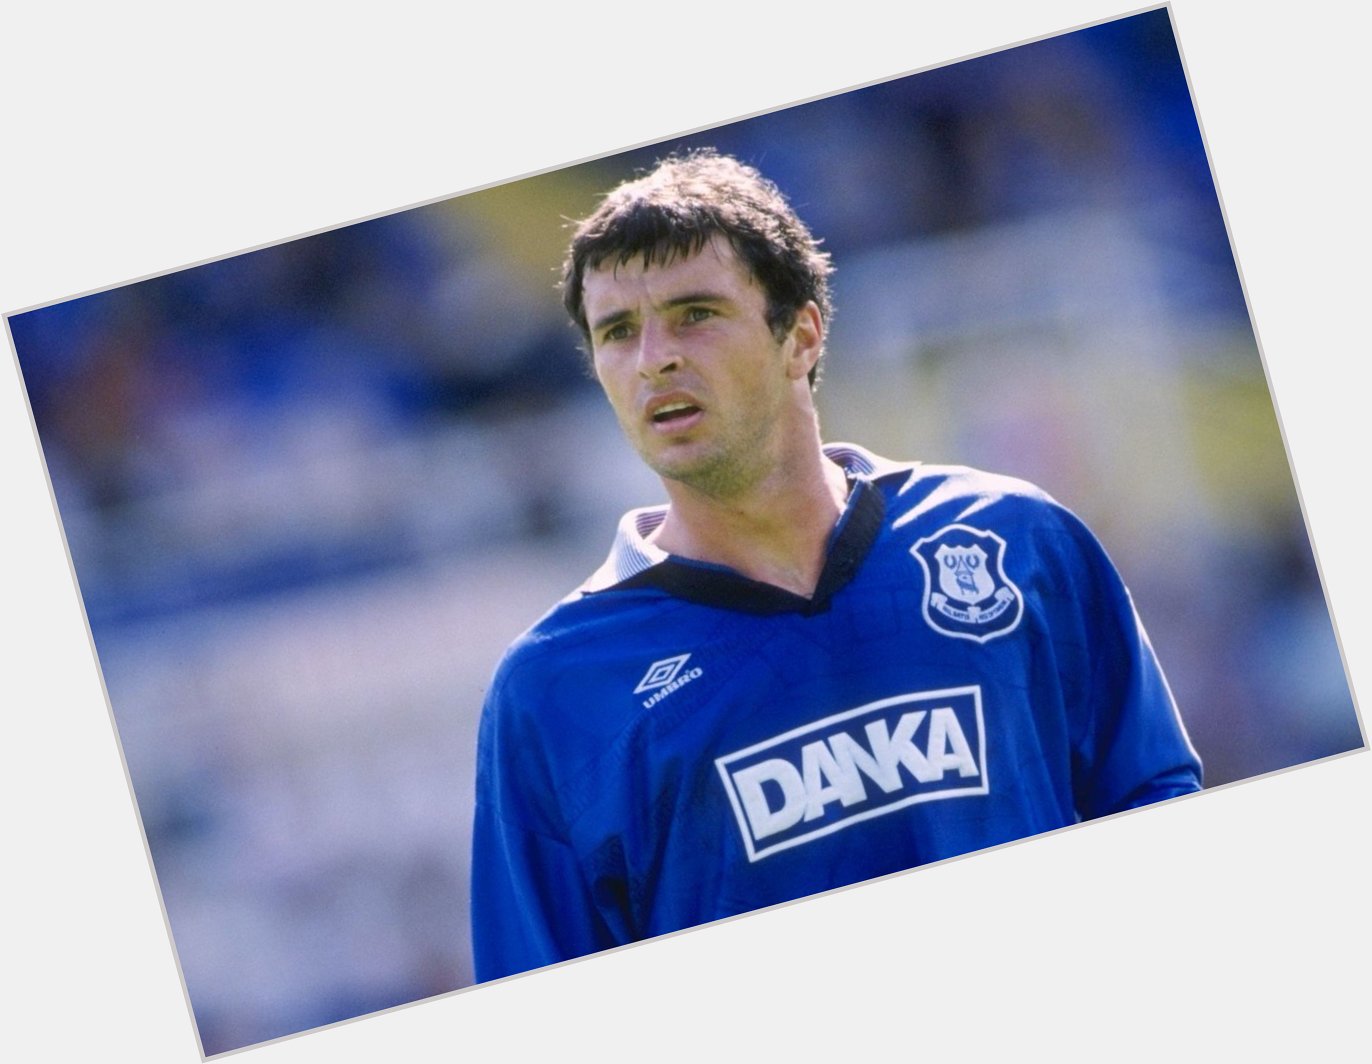 Happy birthday to one of the greatest, Gary Speed. RIP. 